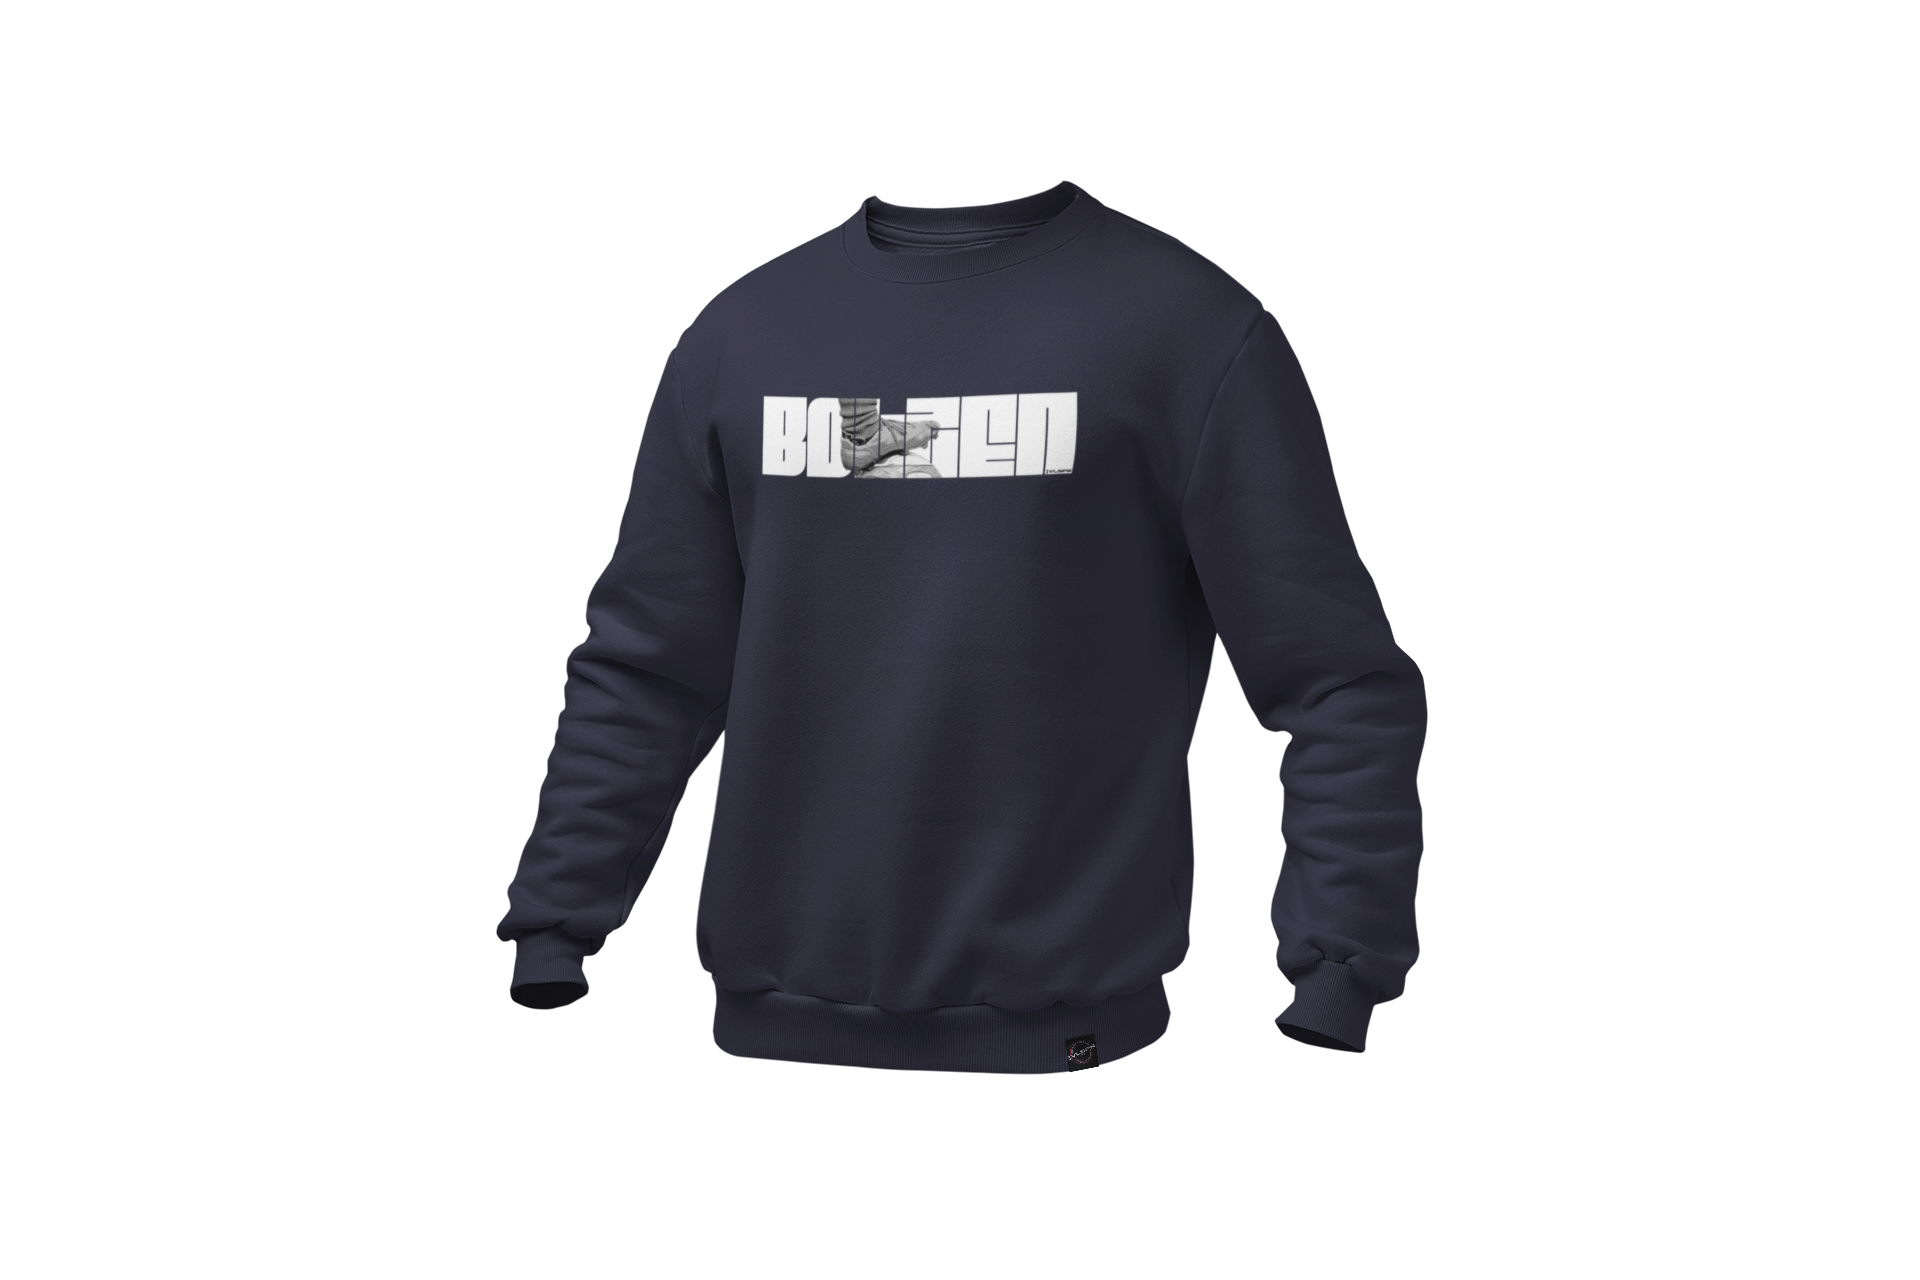 mockup-of-a-ghosted-crewneck-sweatshirt-over-a-solid-background-26960 (28).png